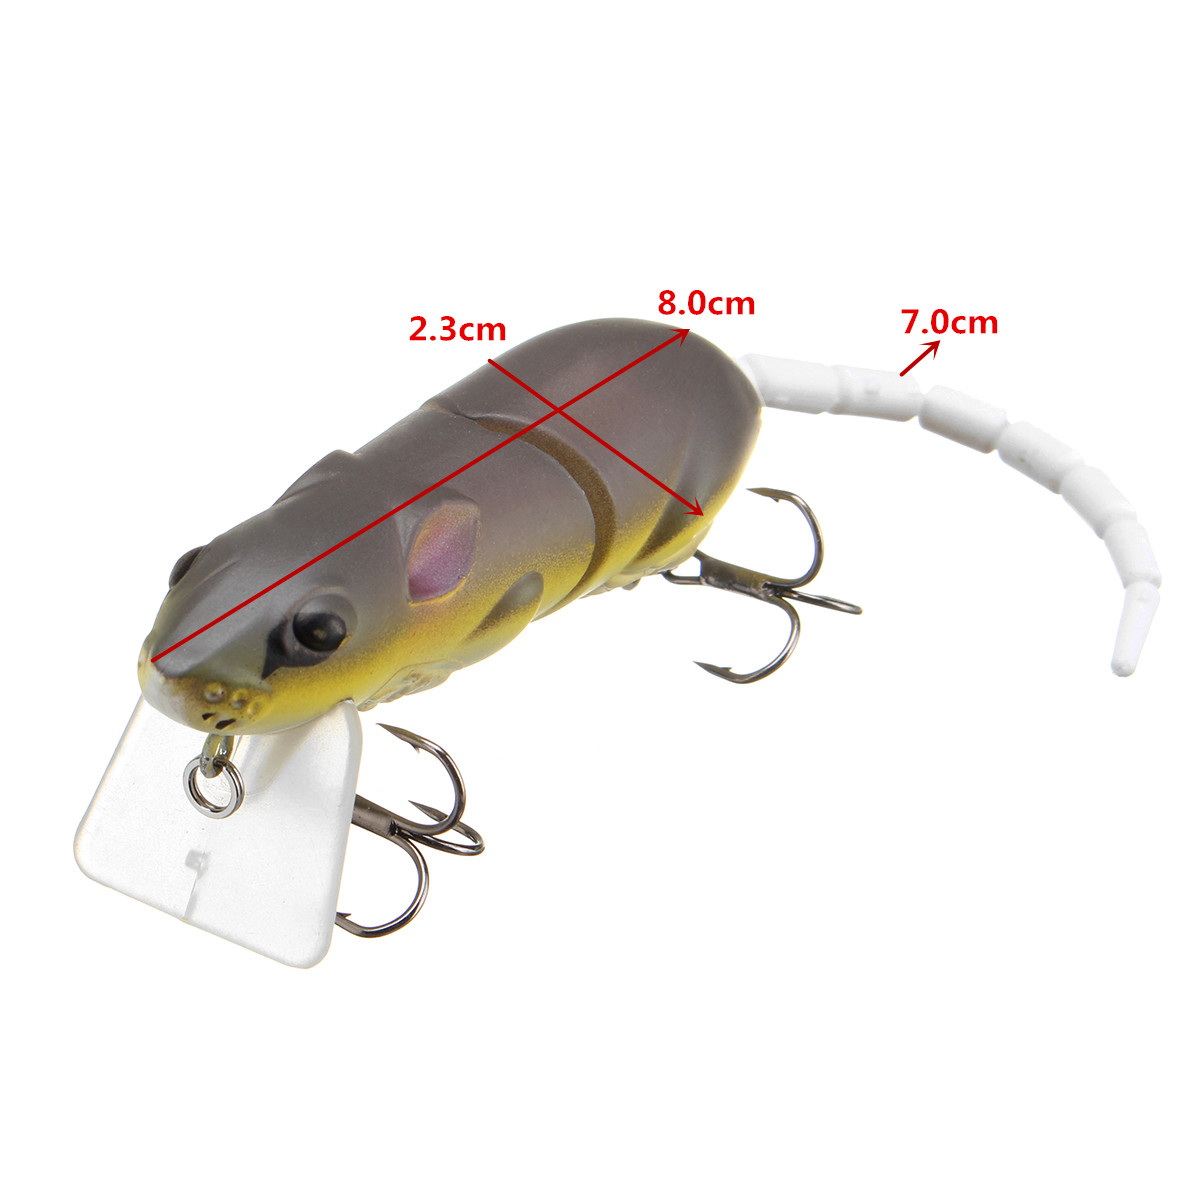 25cm-155g-Jointed-Rat-Fishing-Lure-Mouse-Floating-Crankbait-Sea-Topwater-3D-Eyes-Artificial-Baits-1354966-4